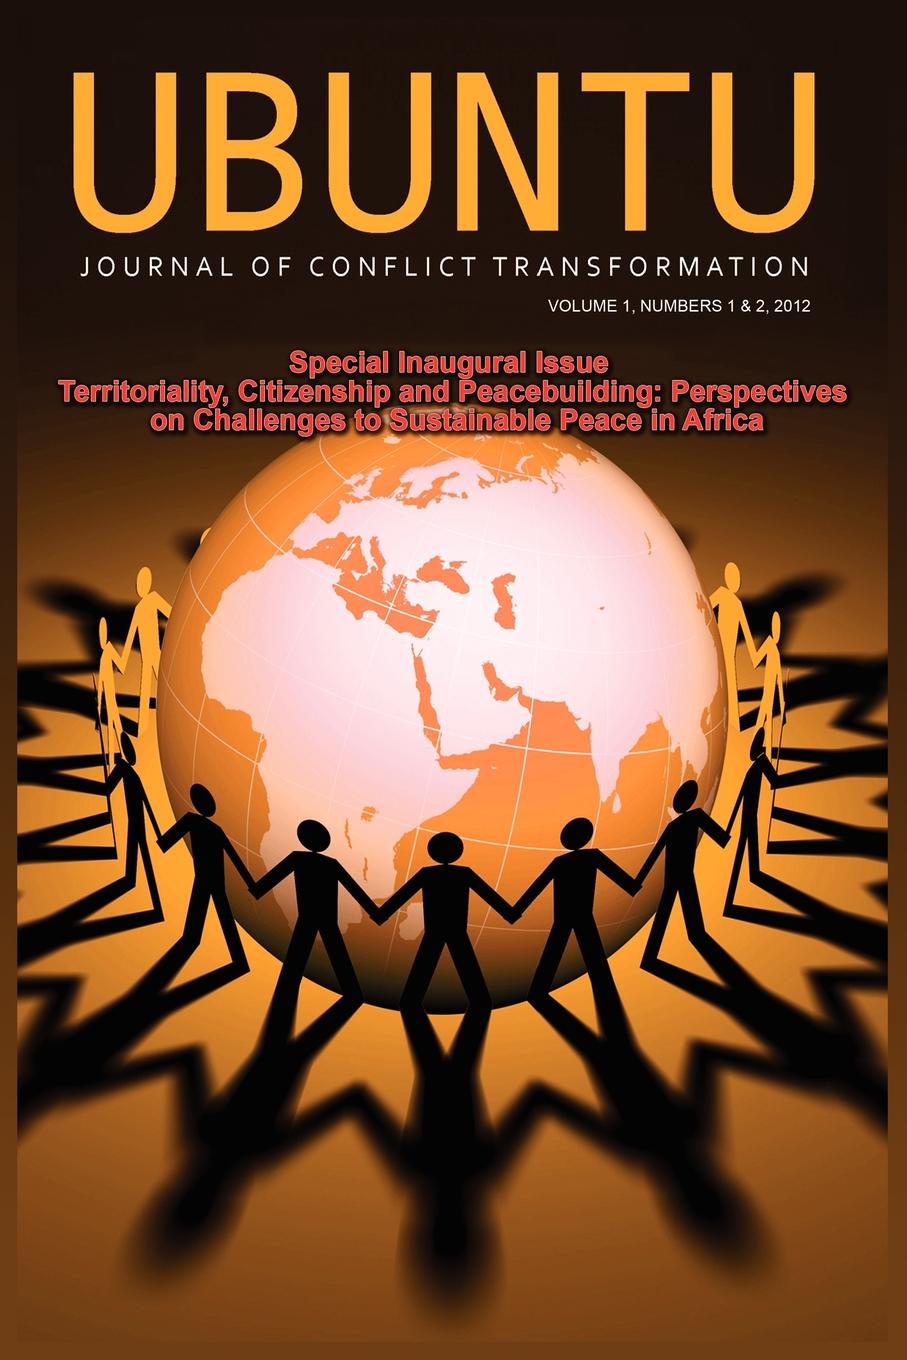 Ubuntu. Journal of Conflict and Social Transformation: Vol 1, Number 1-2, 2012